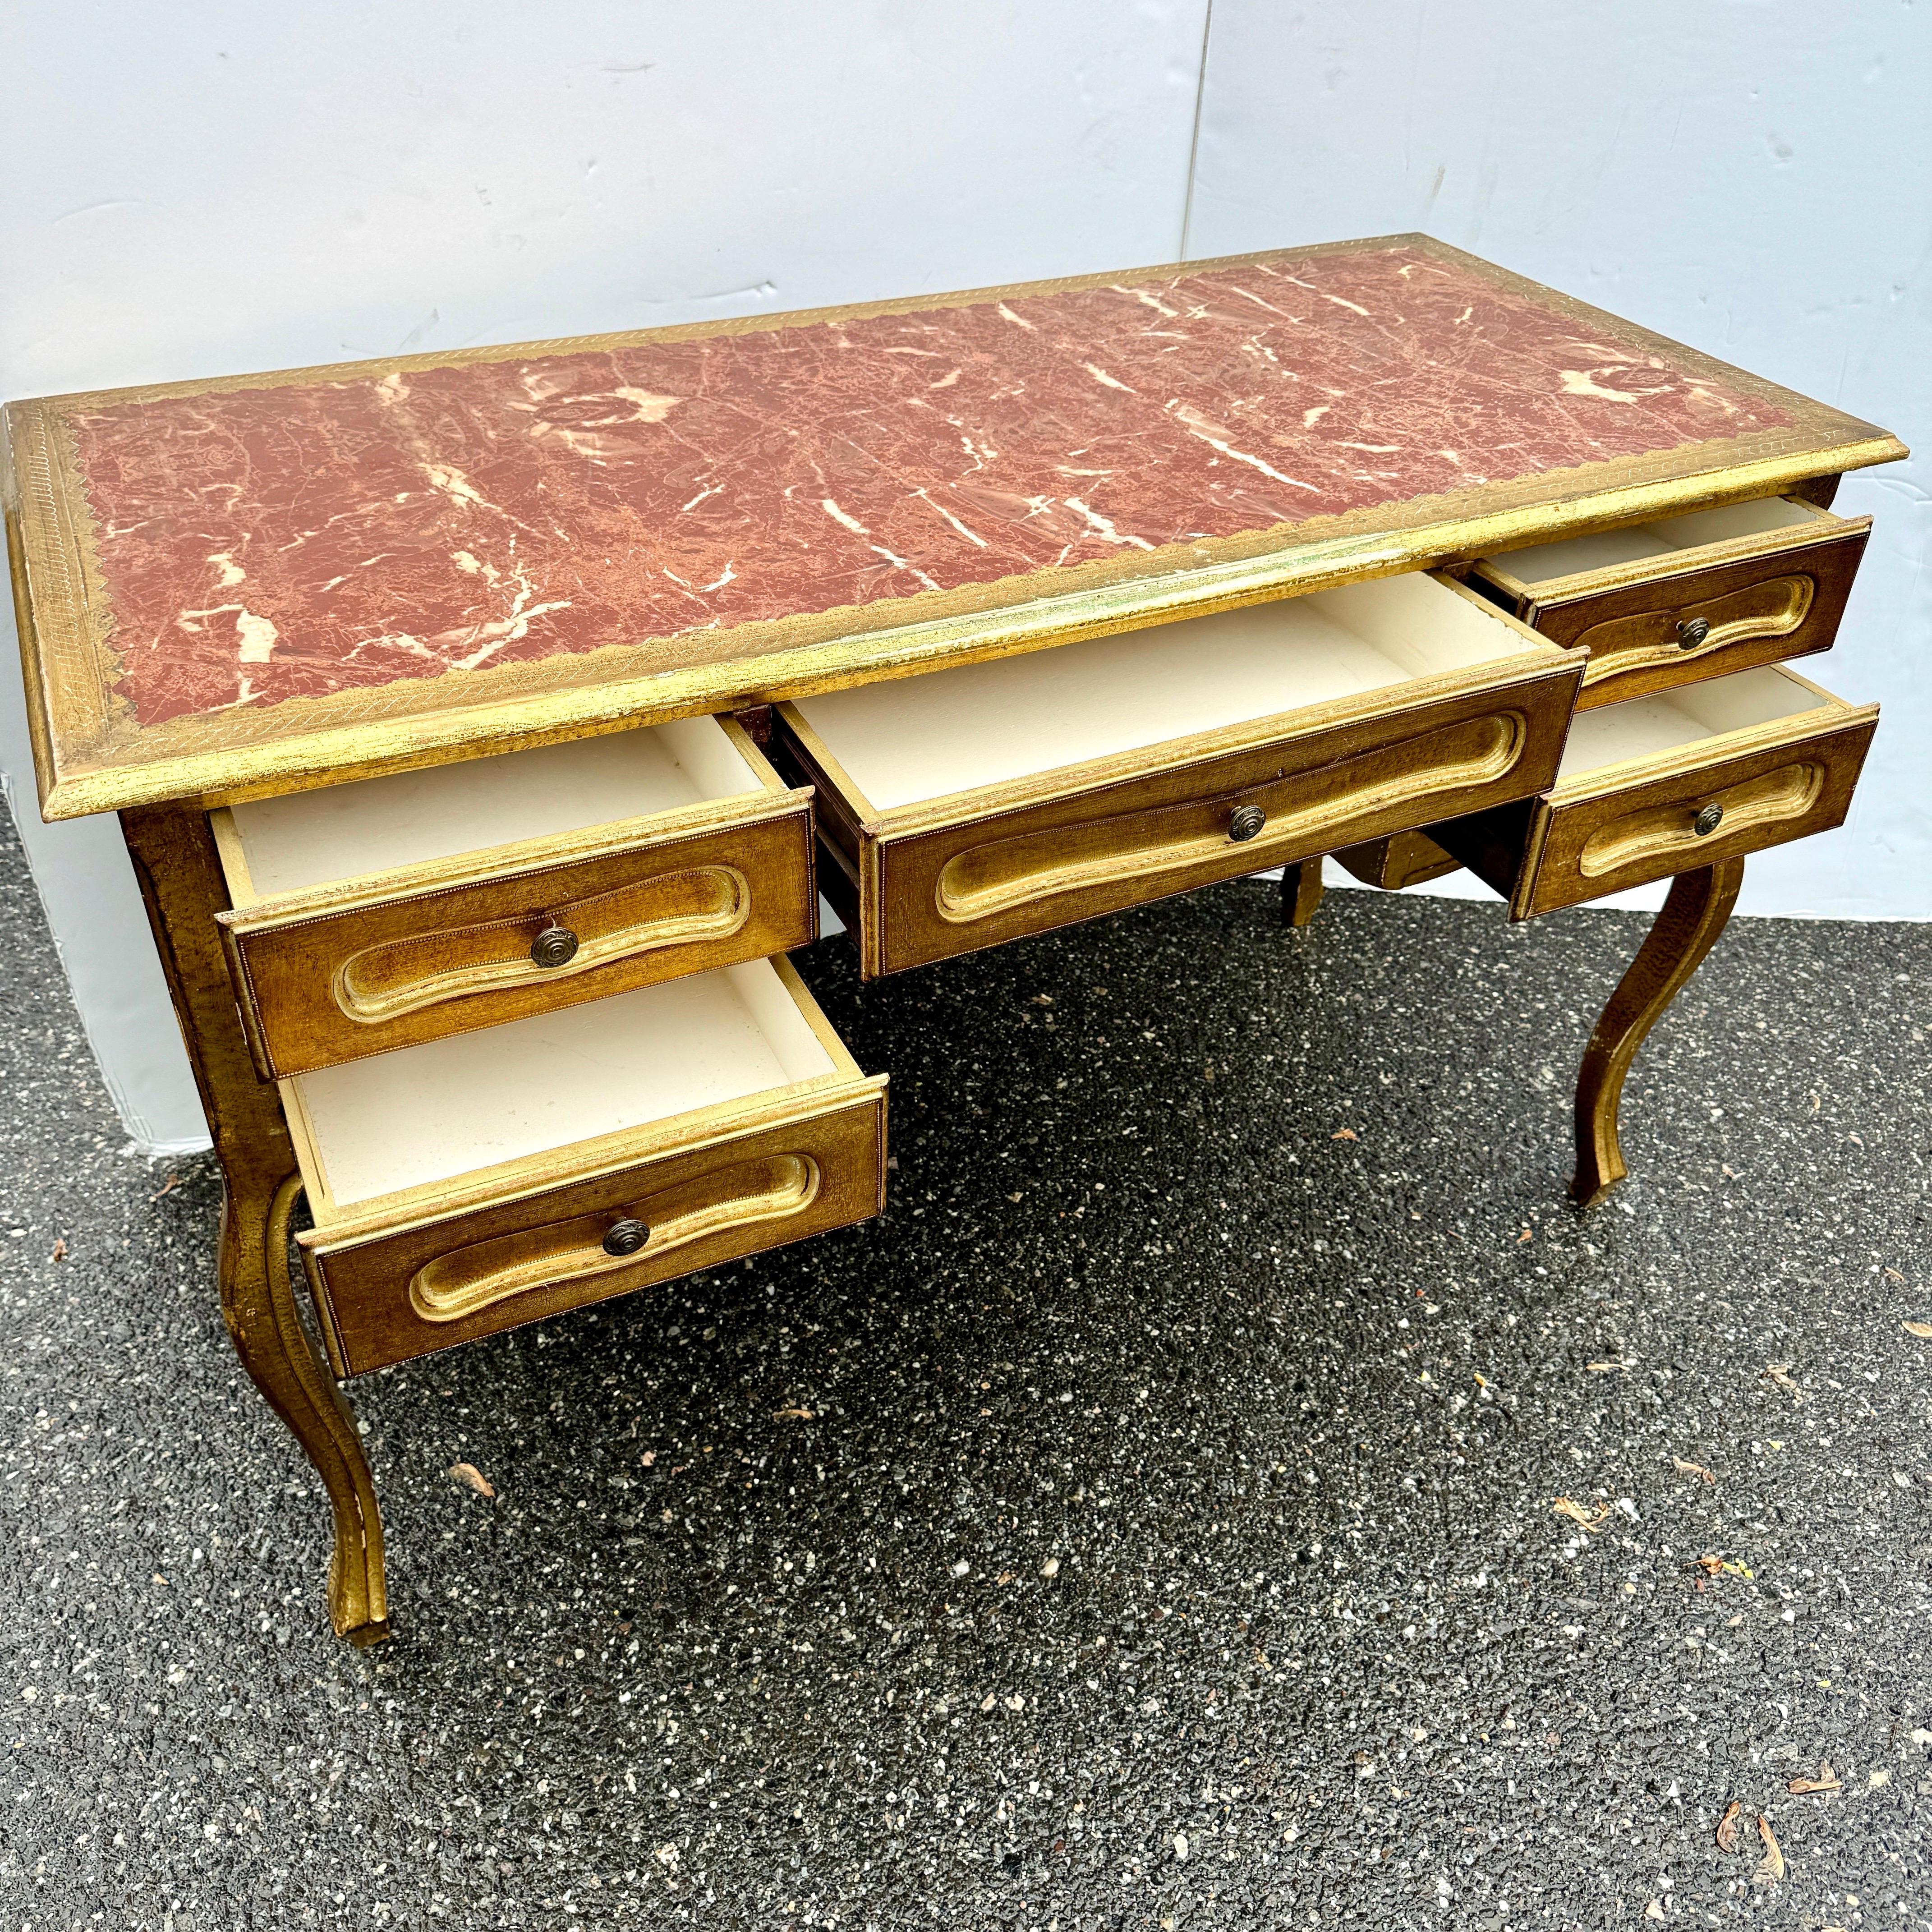 Italian Mid-Century Florentine Gilt Desk with Drawers For Sale 11